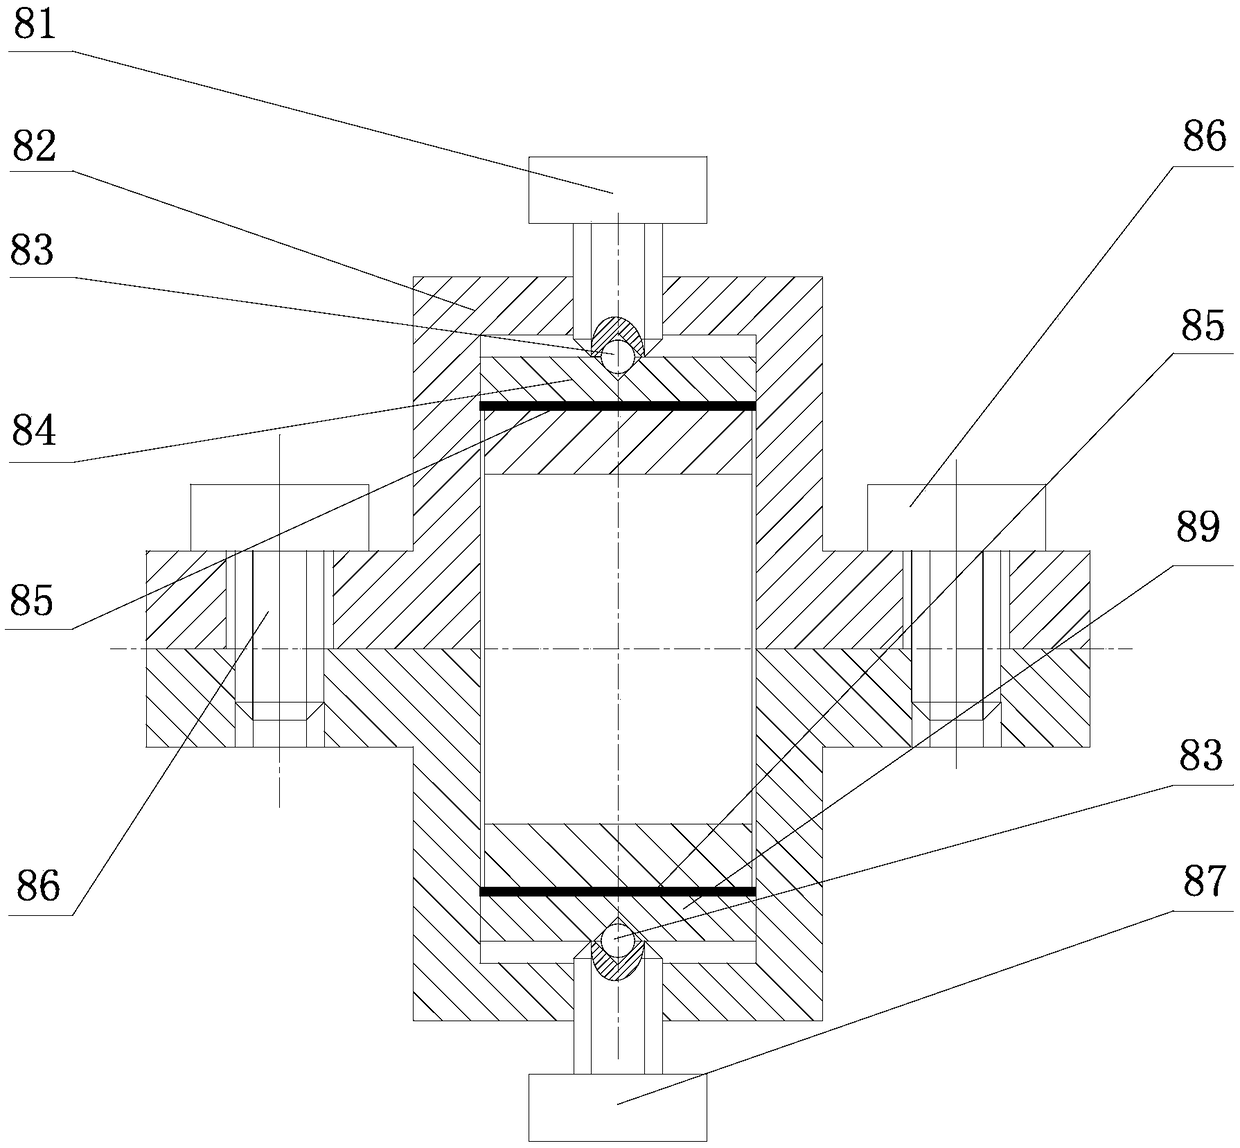 A sticky-slip inertial linear actuator based on surface inclination friction control